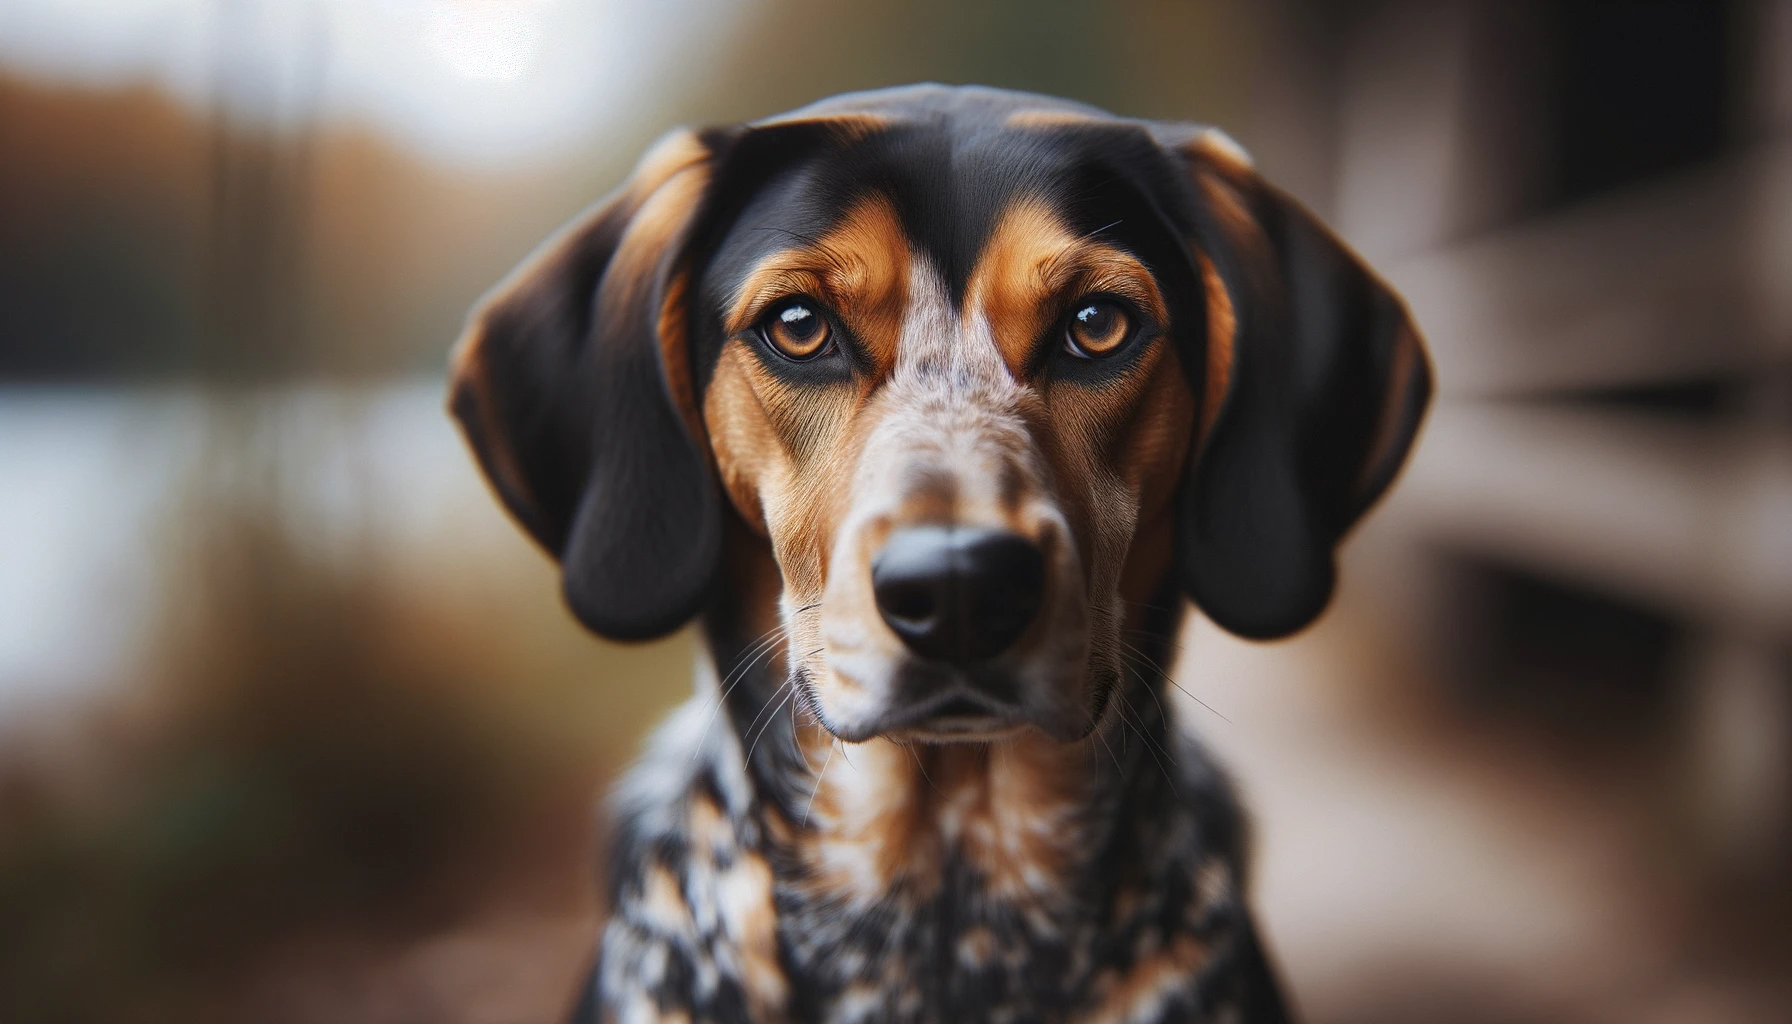 A Coonhound Lab mix looking fabulous, showing off its diverse coat and deep eyes